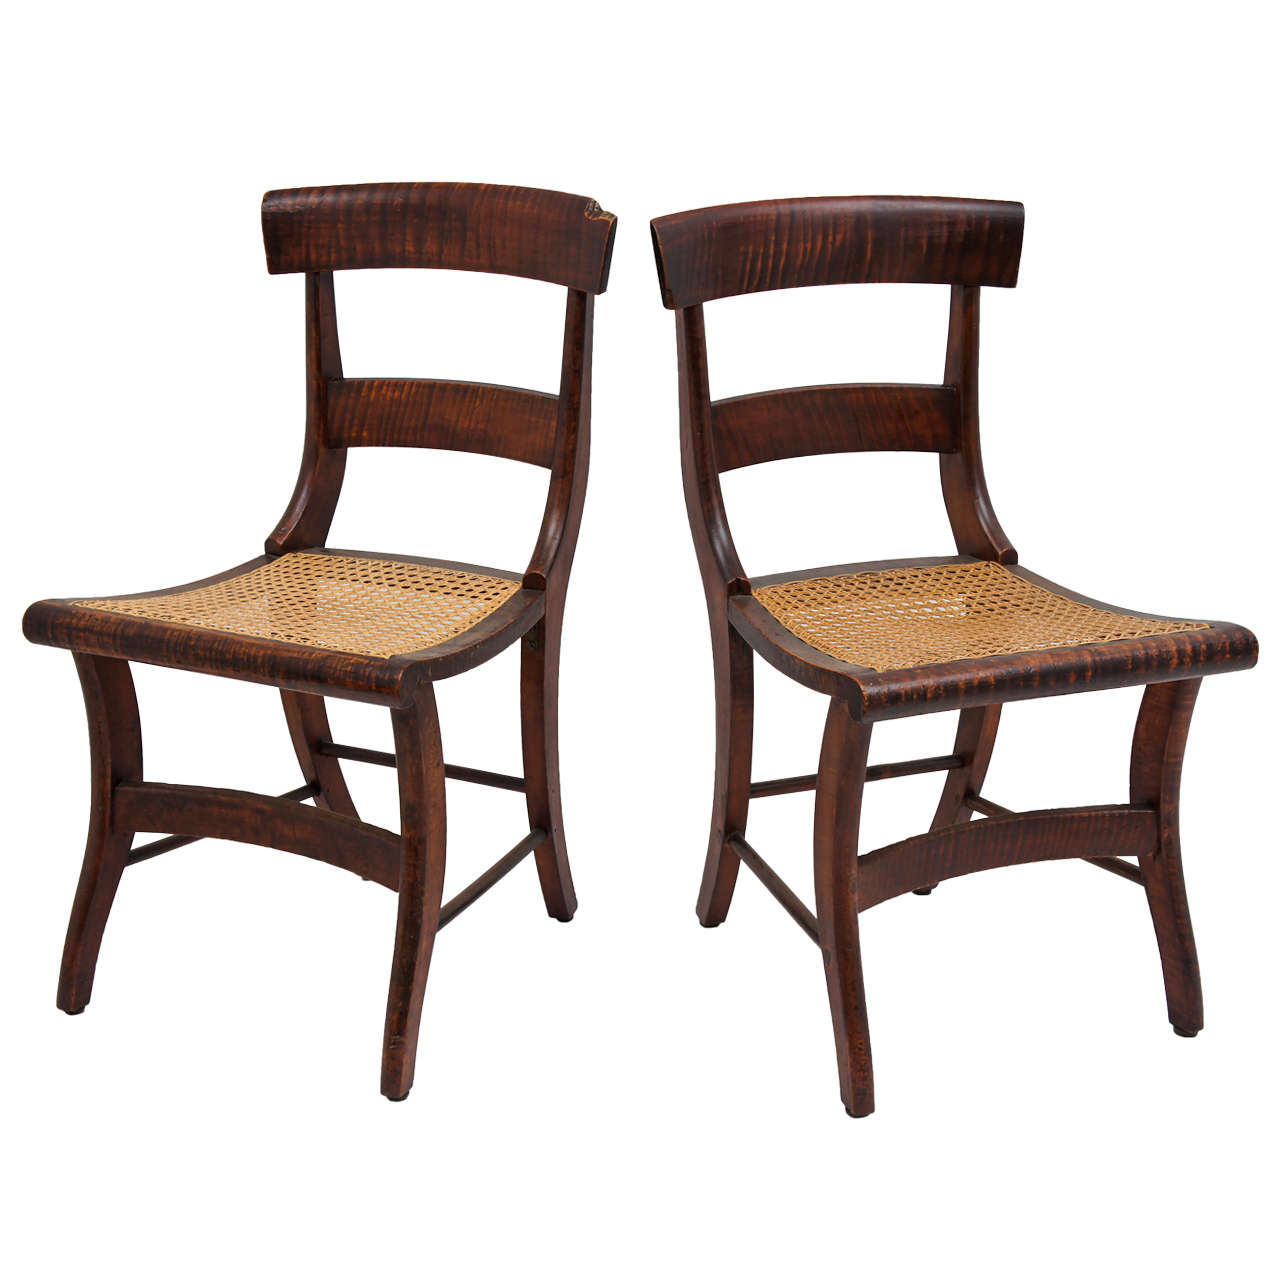 Set of Six Tiger Maple Dining Chairs, 19thC.